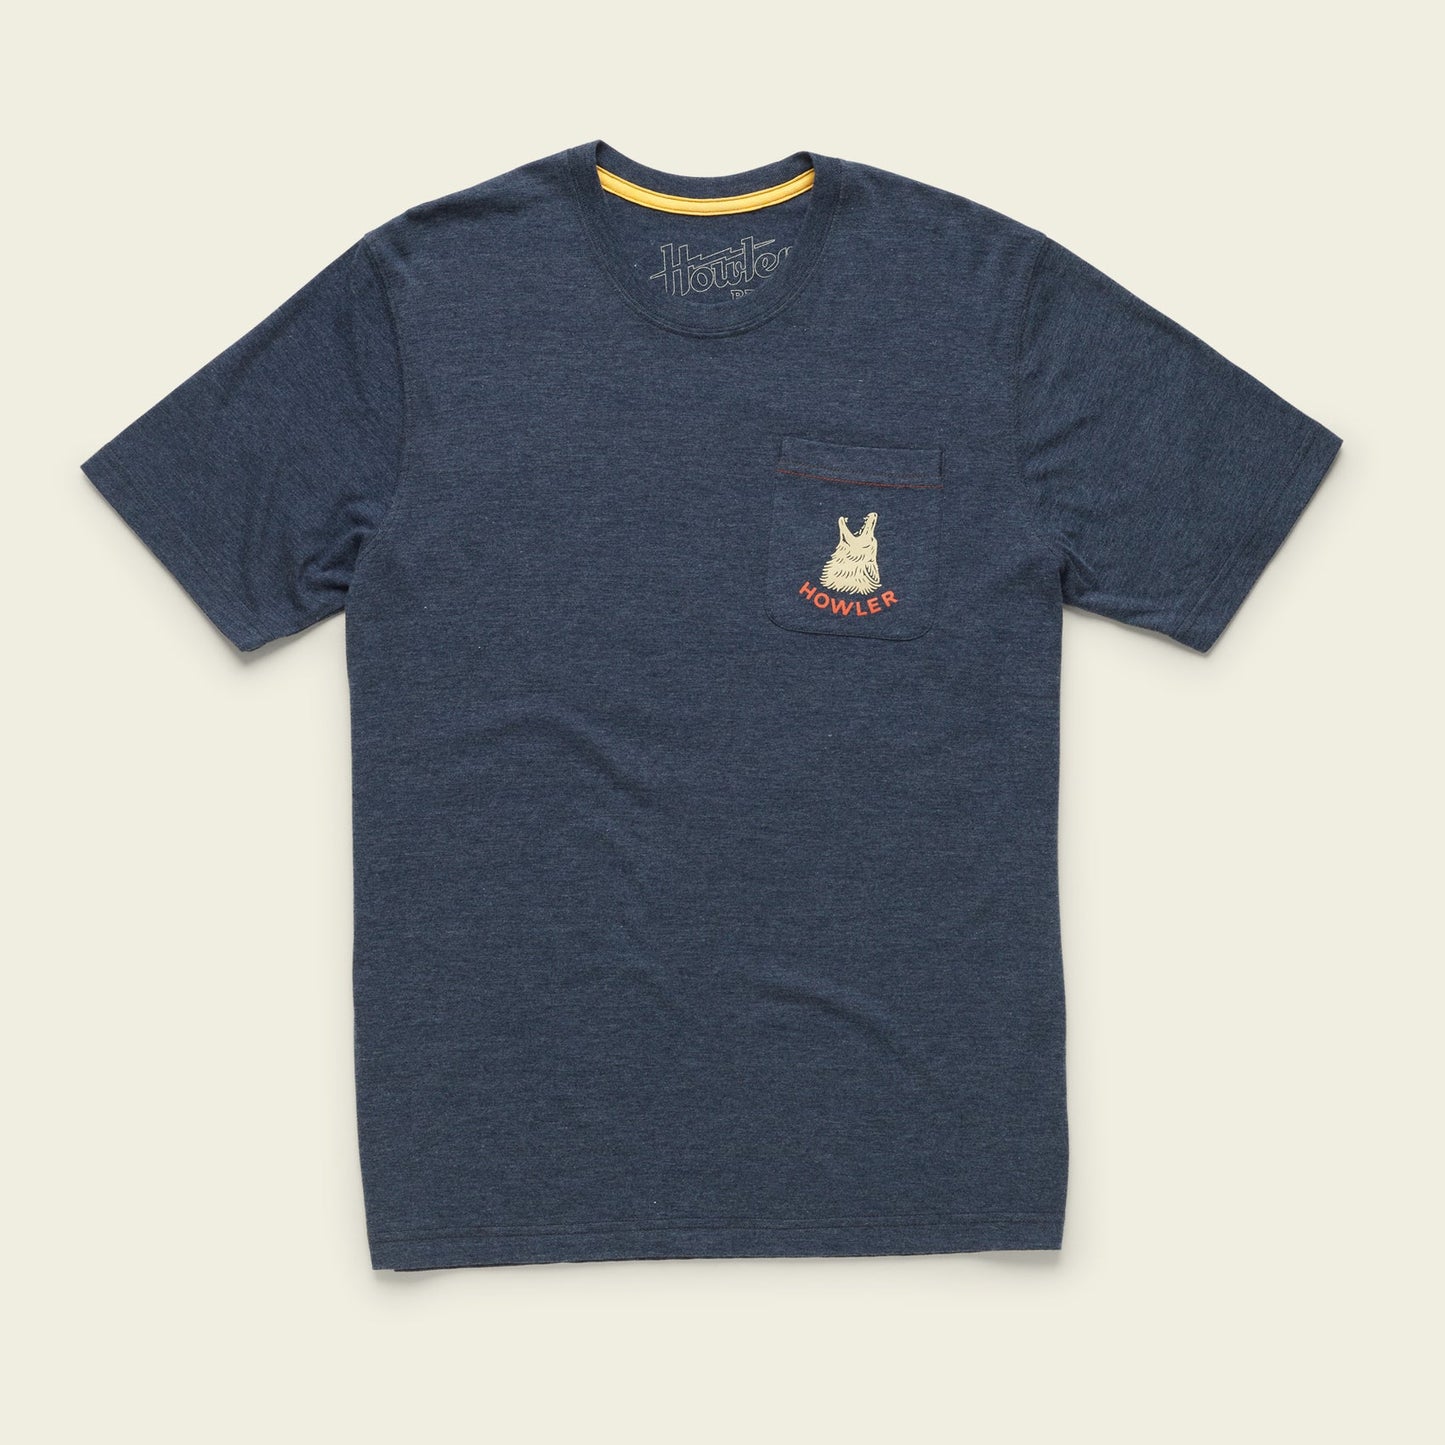 FINAL SALE - Select Pocket T - Howler Coyote: Navy Heather